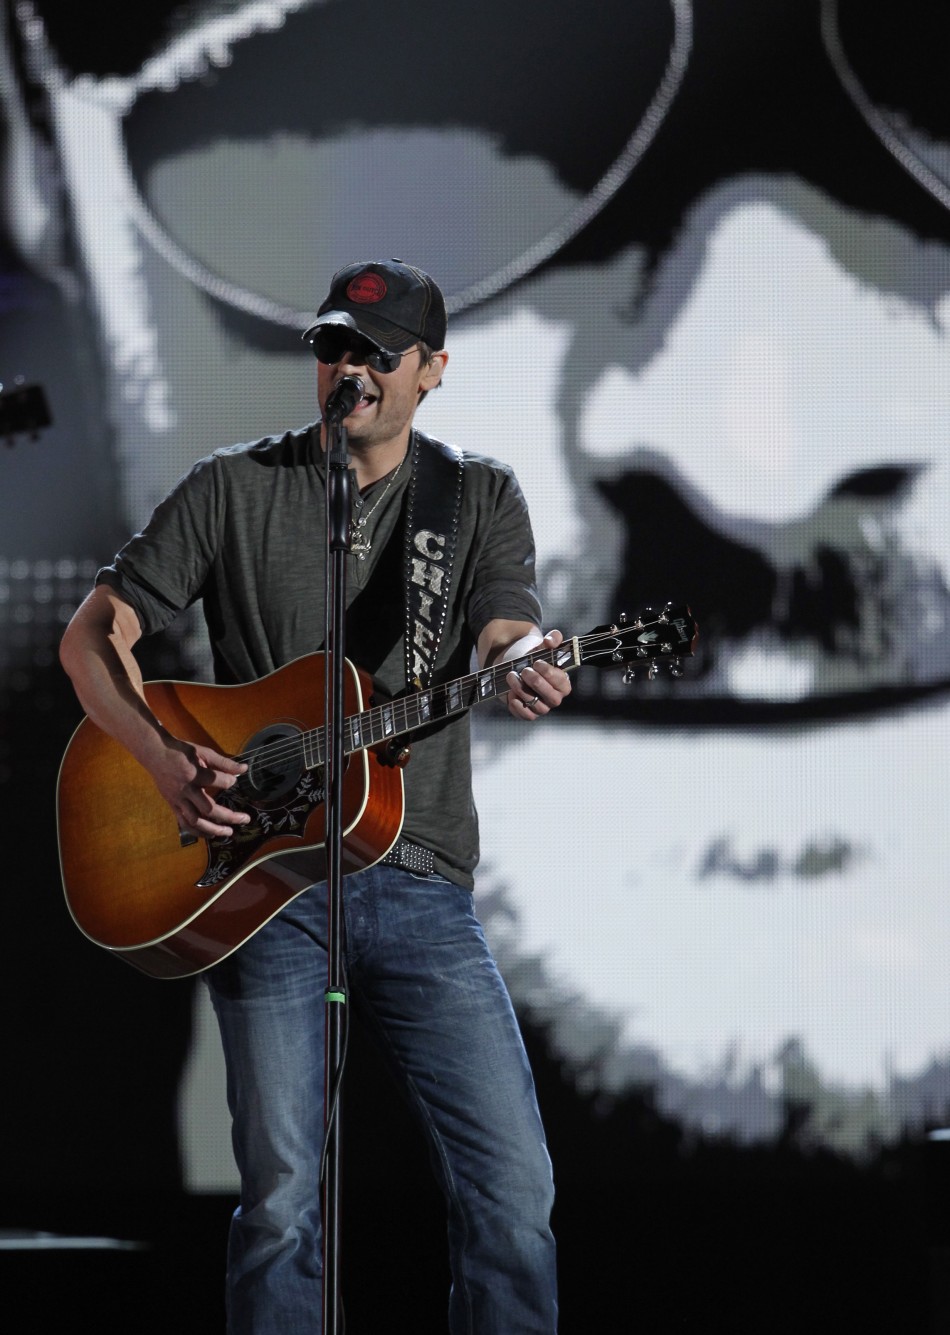 Singer Eric Church smiles performs quotSpringsteenquot at the 47th annual Academy of Country Music Awards in Las Vegas